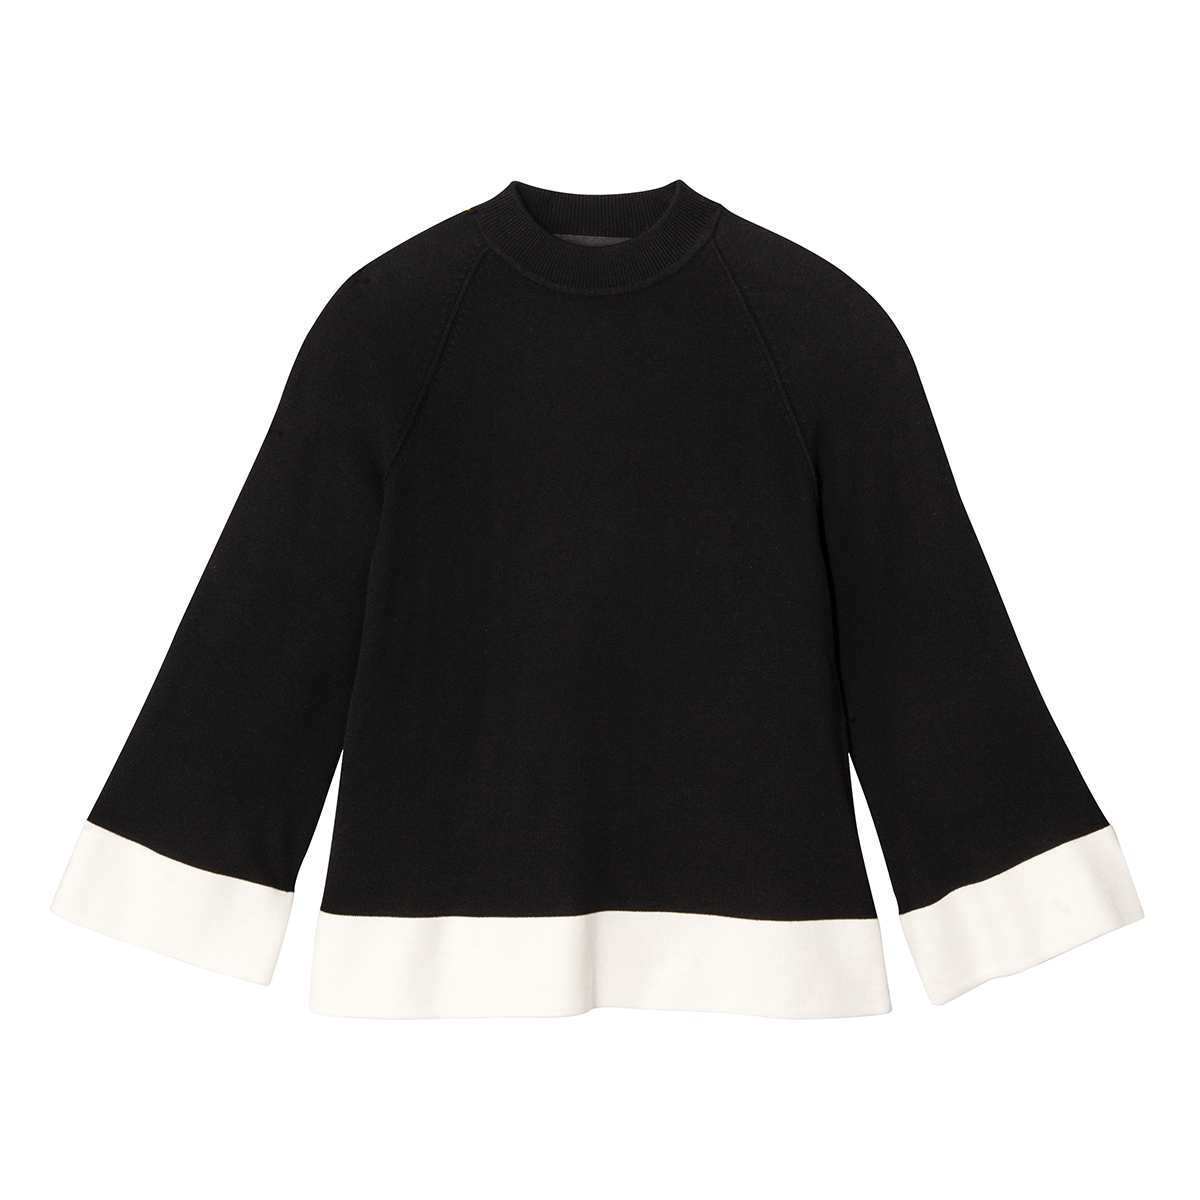 Black and White High Neck Sweater Top, $28